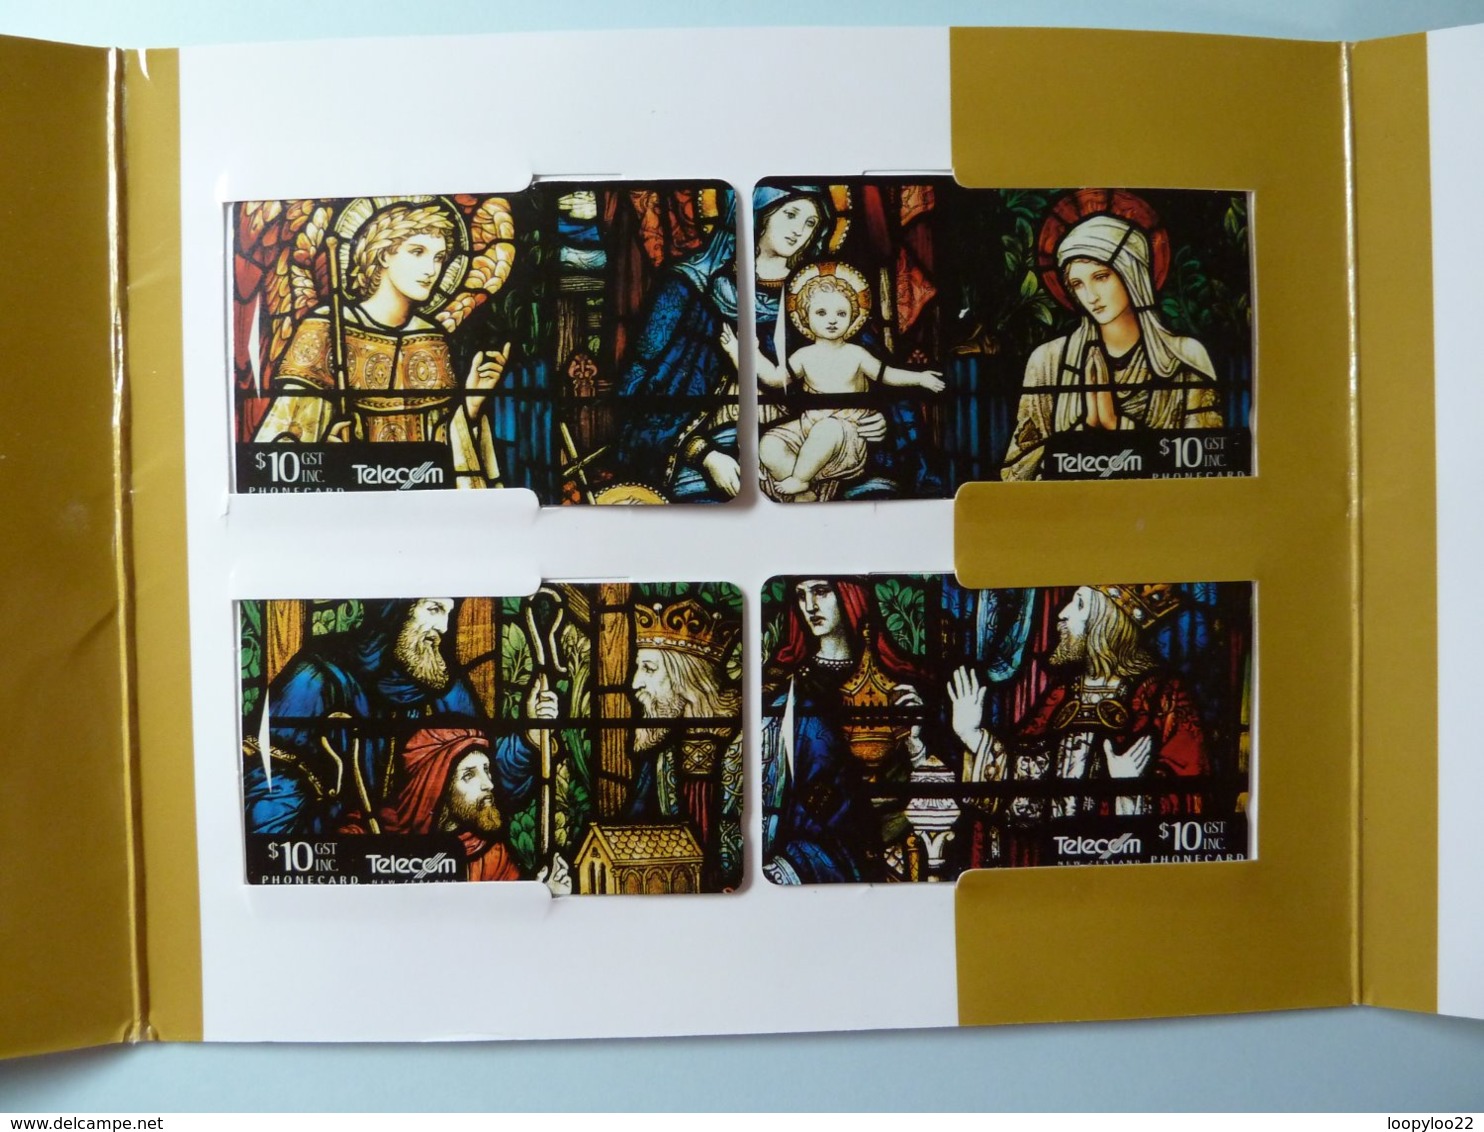 New Zealand - GPT - Stained Glass Windows - Phonecard & Stamp - Limited Edition 3000ex & Certificate - Mint In Folder - Nuova Zelanda